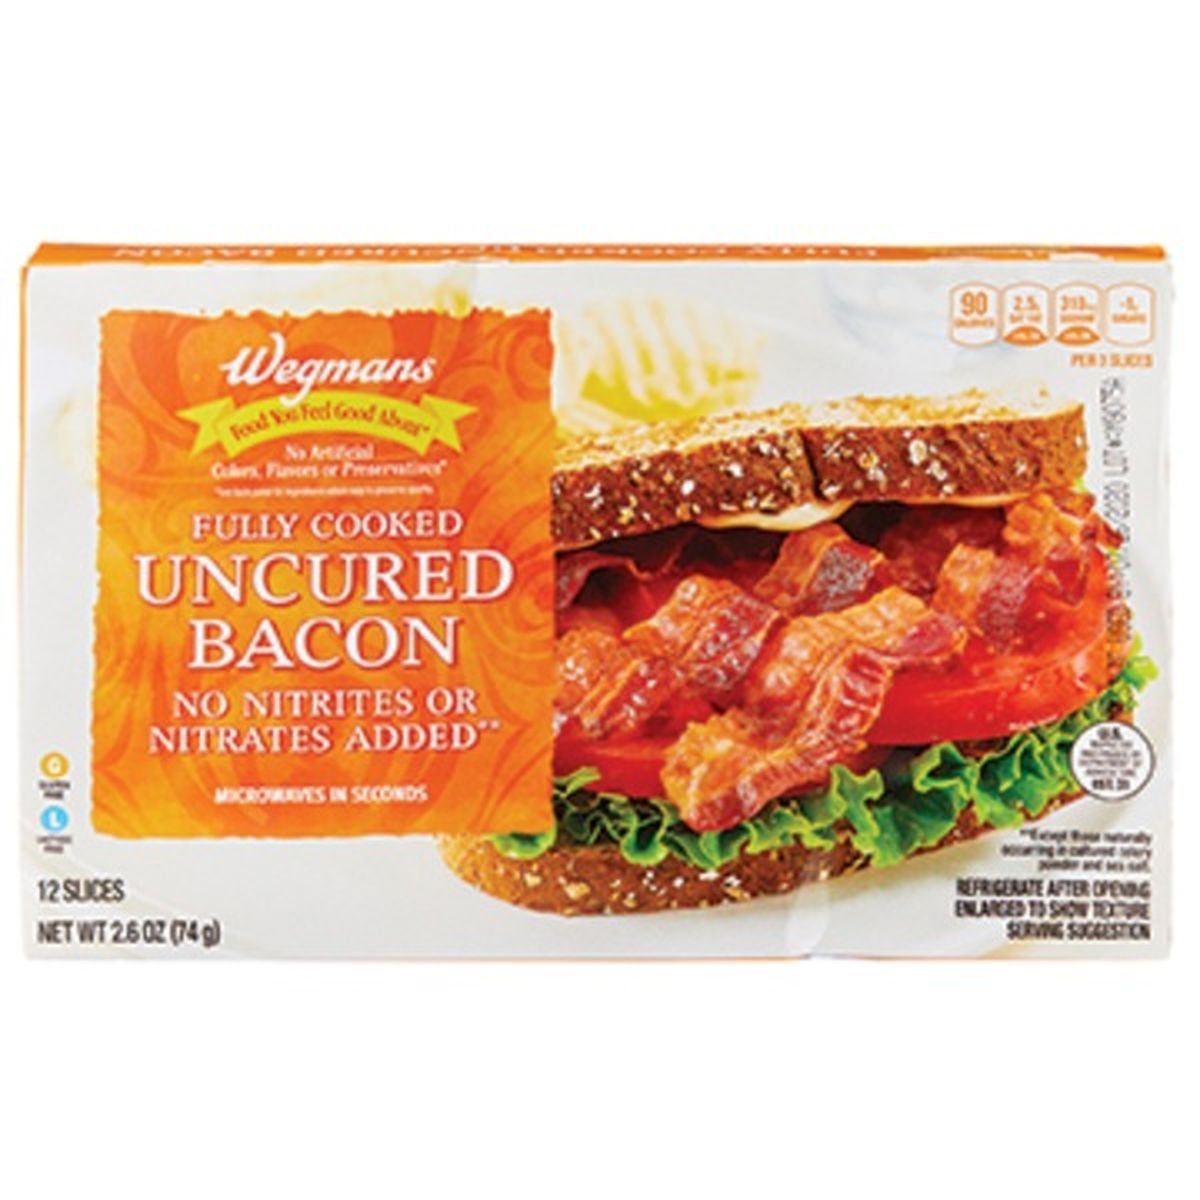 Calories in Wegmans Fully Cooked Uncured Bacon